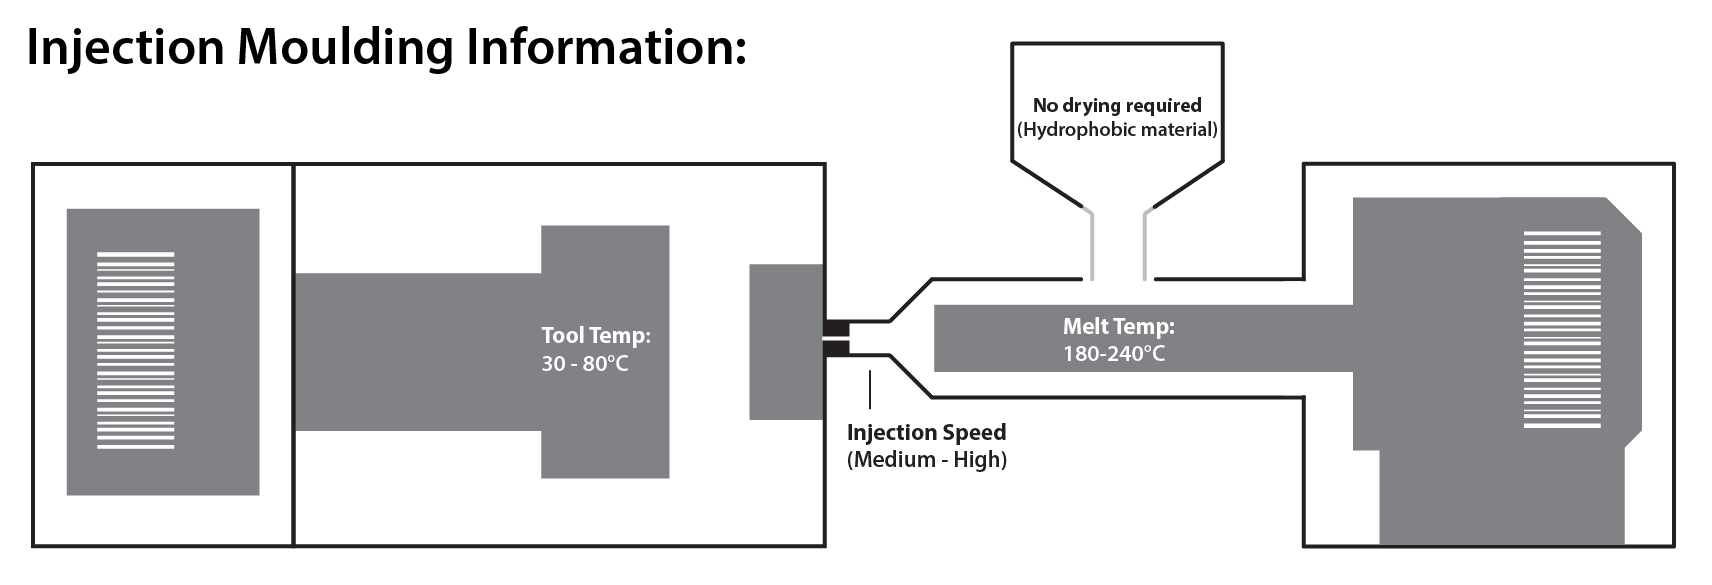 A black and white diagram of injection moulding information